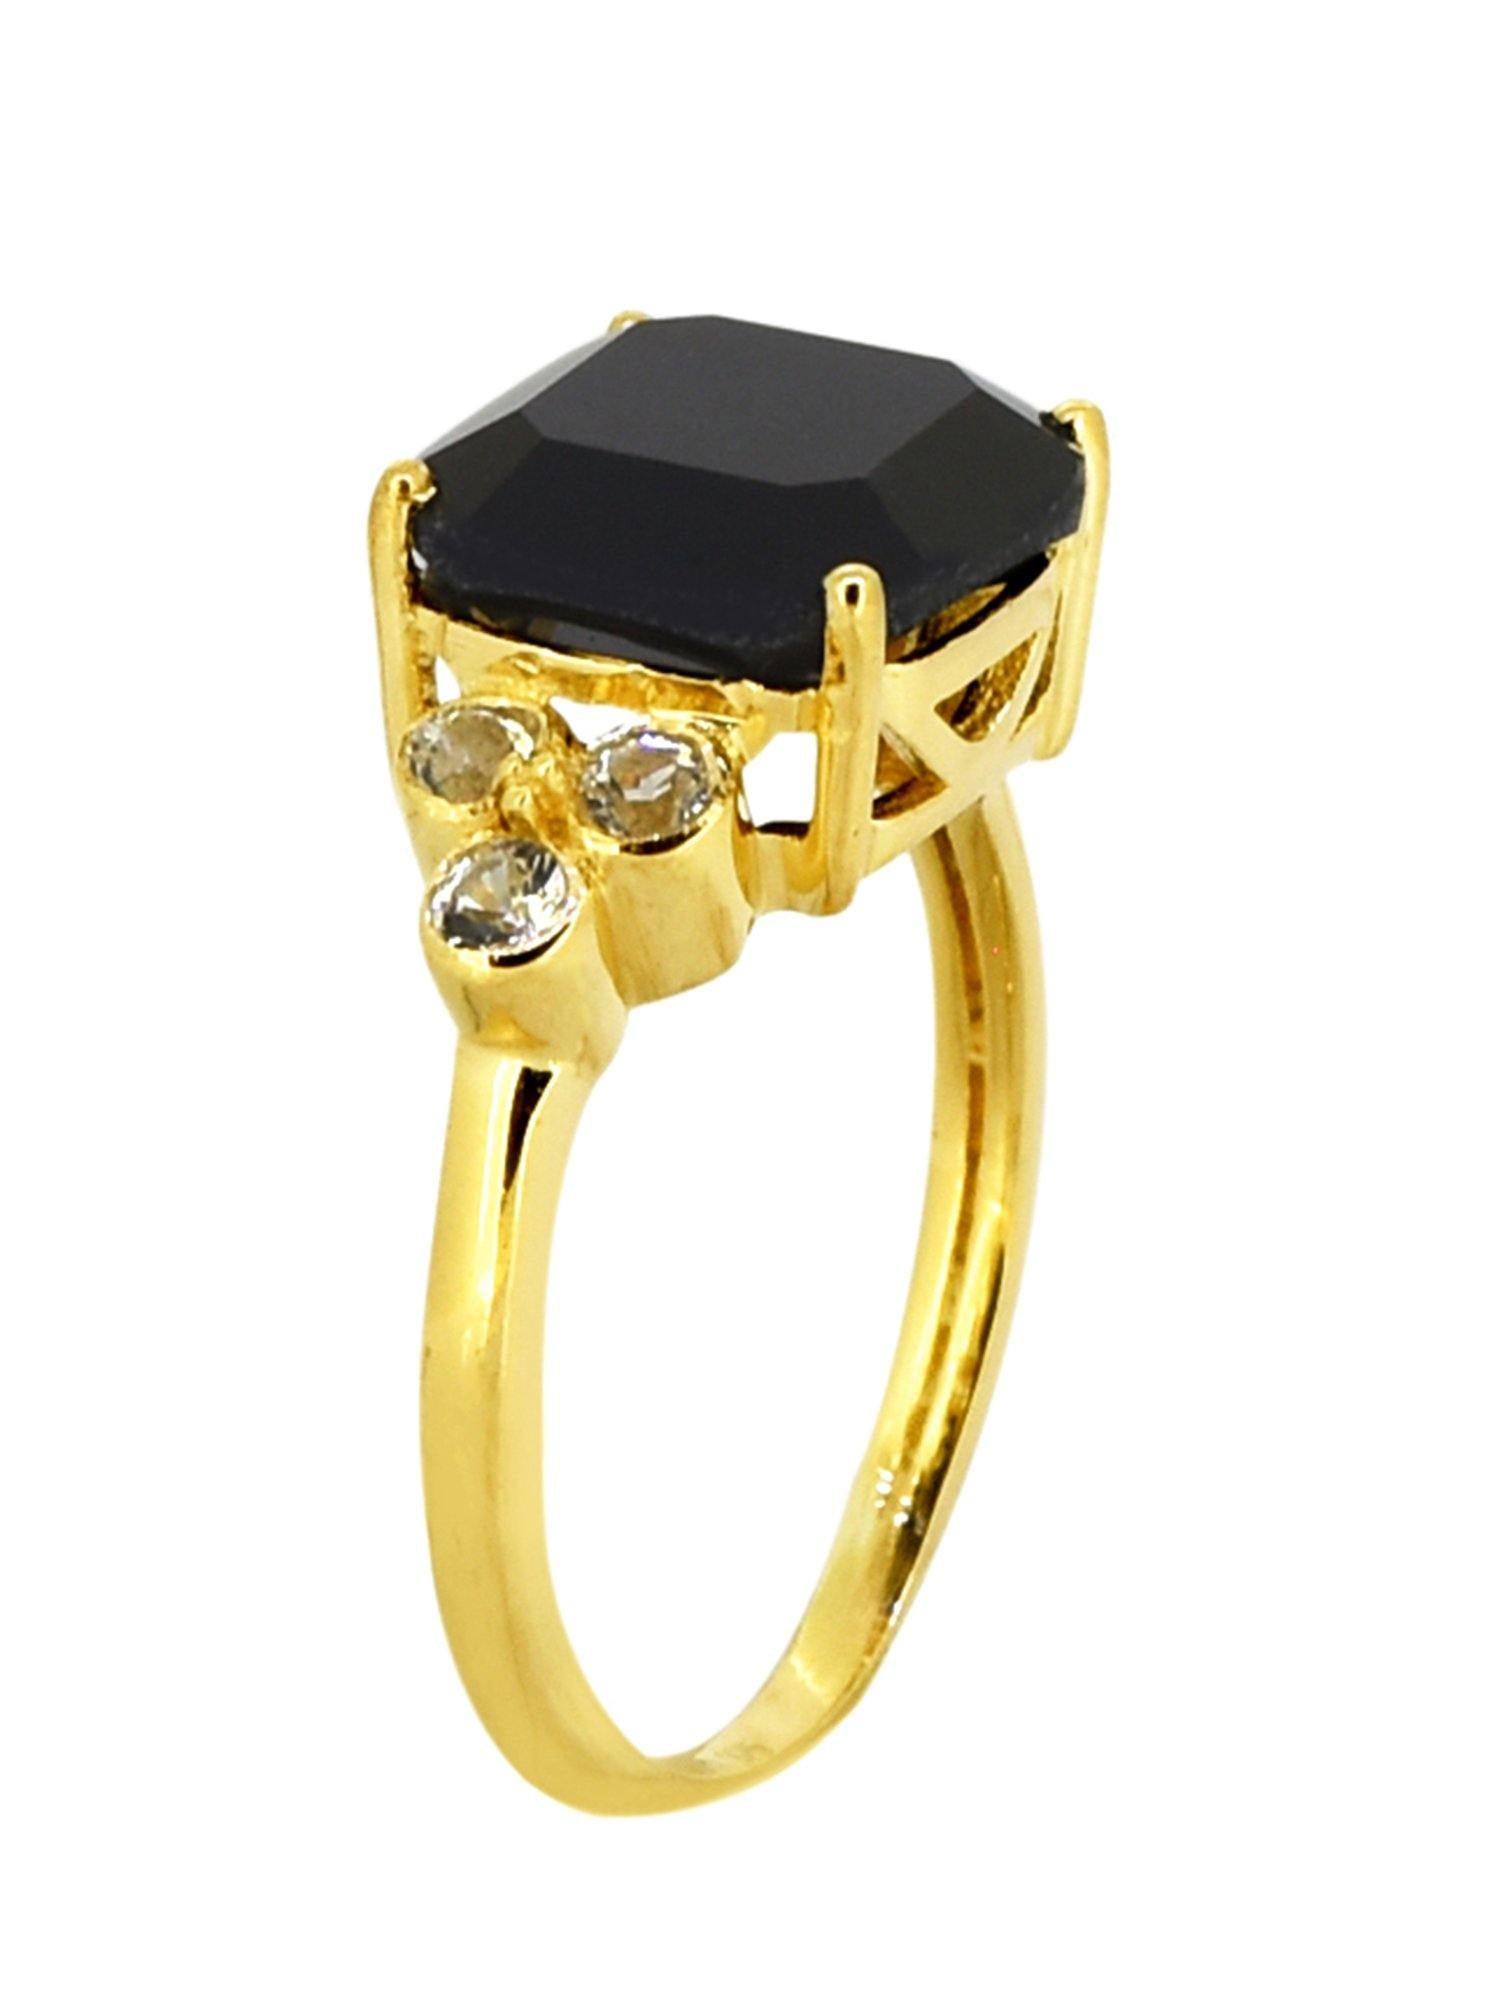 Black Onyx Solid 925 Sterling Silver Gold Plated Ring Genuine Gemstone Jewelry - YoTreasure